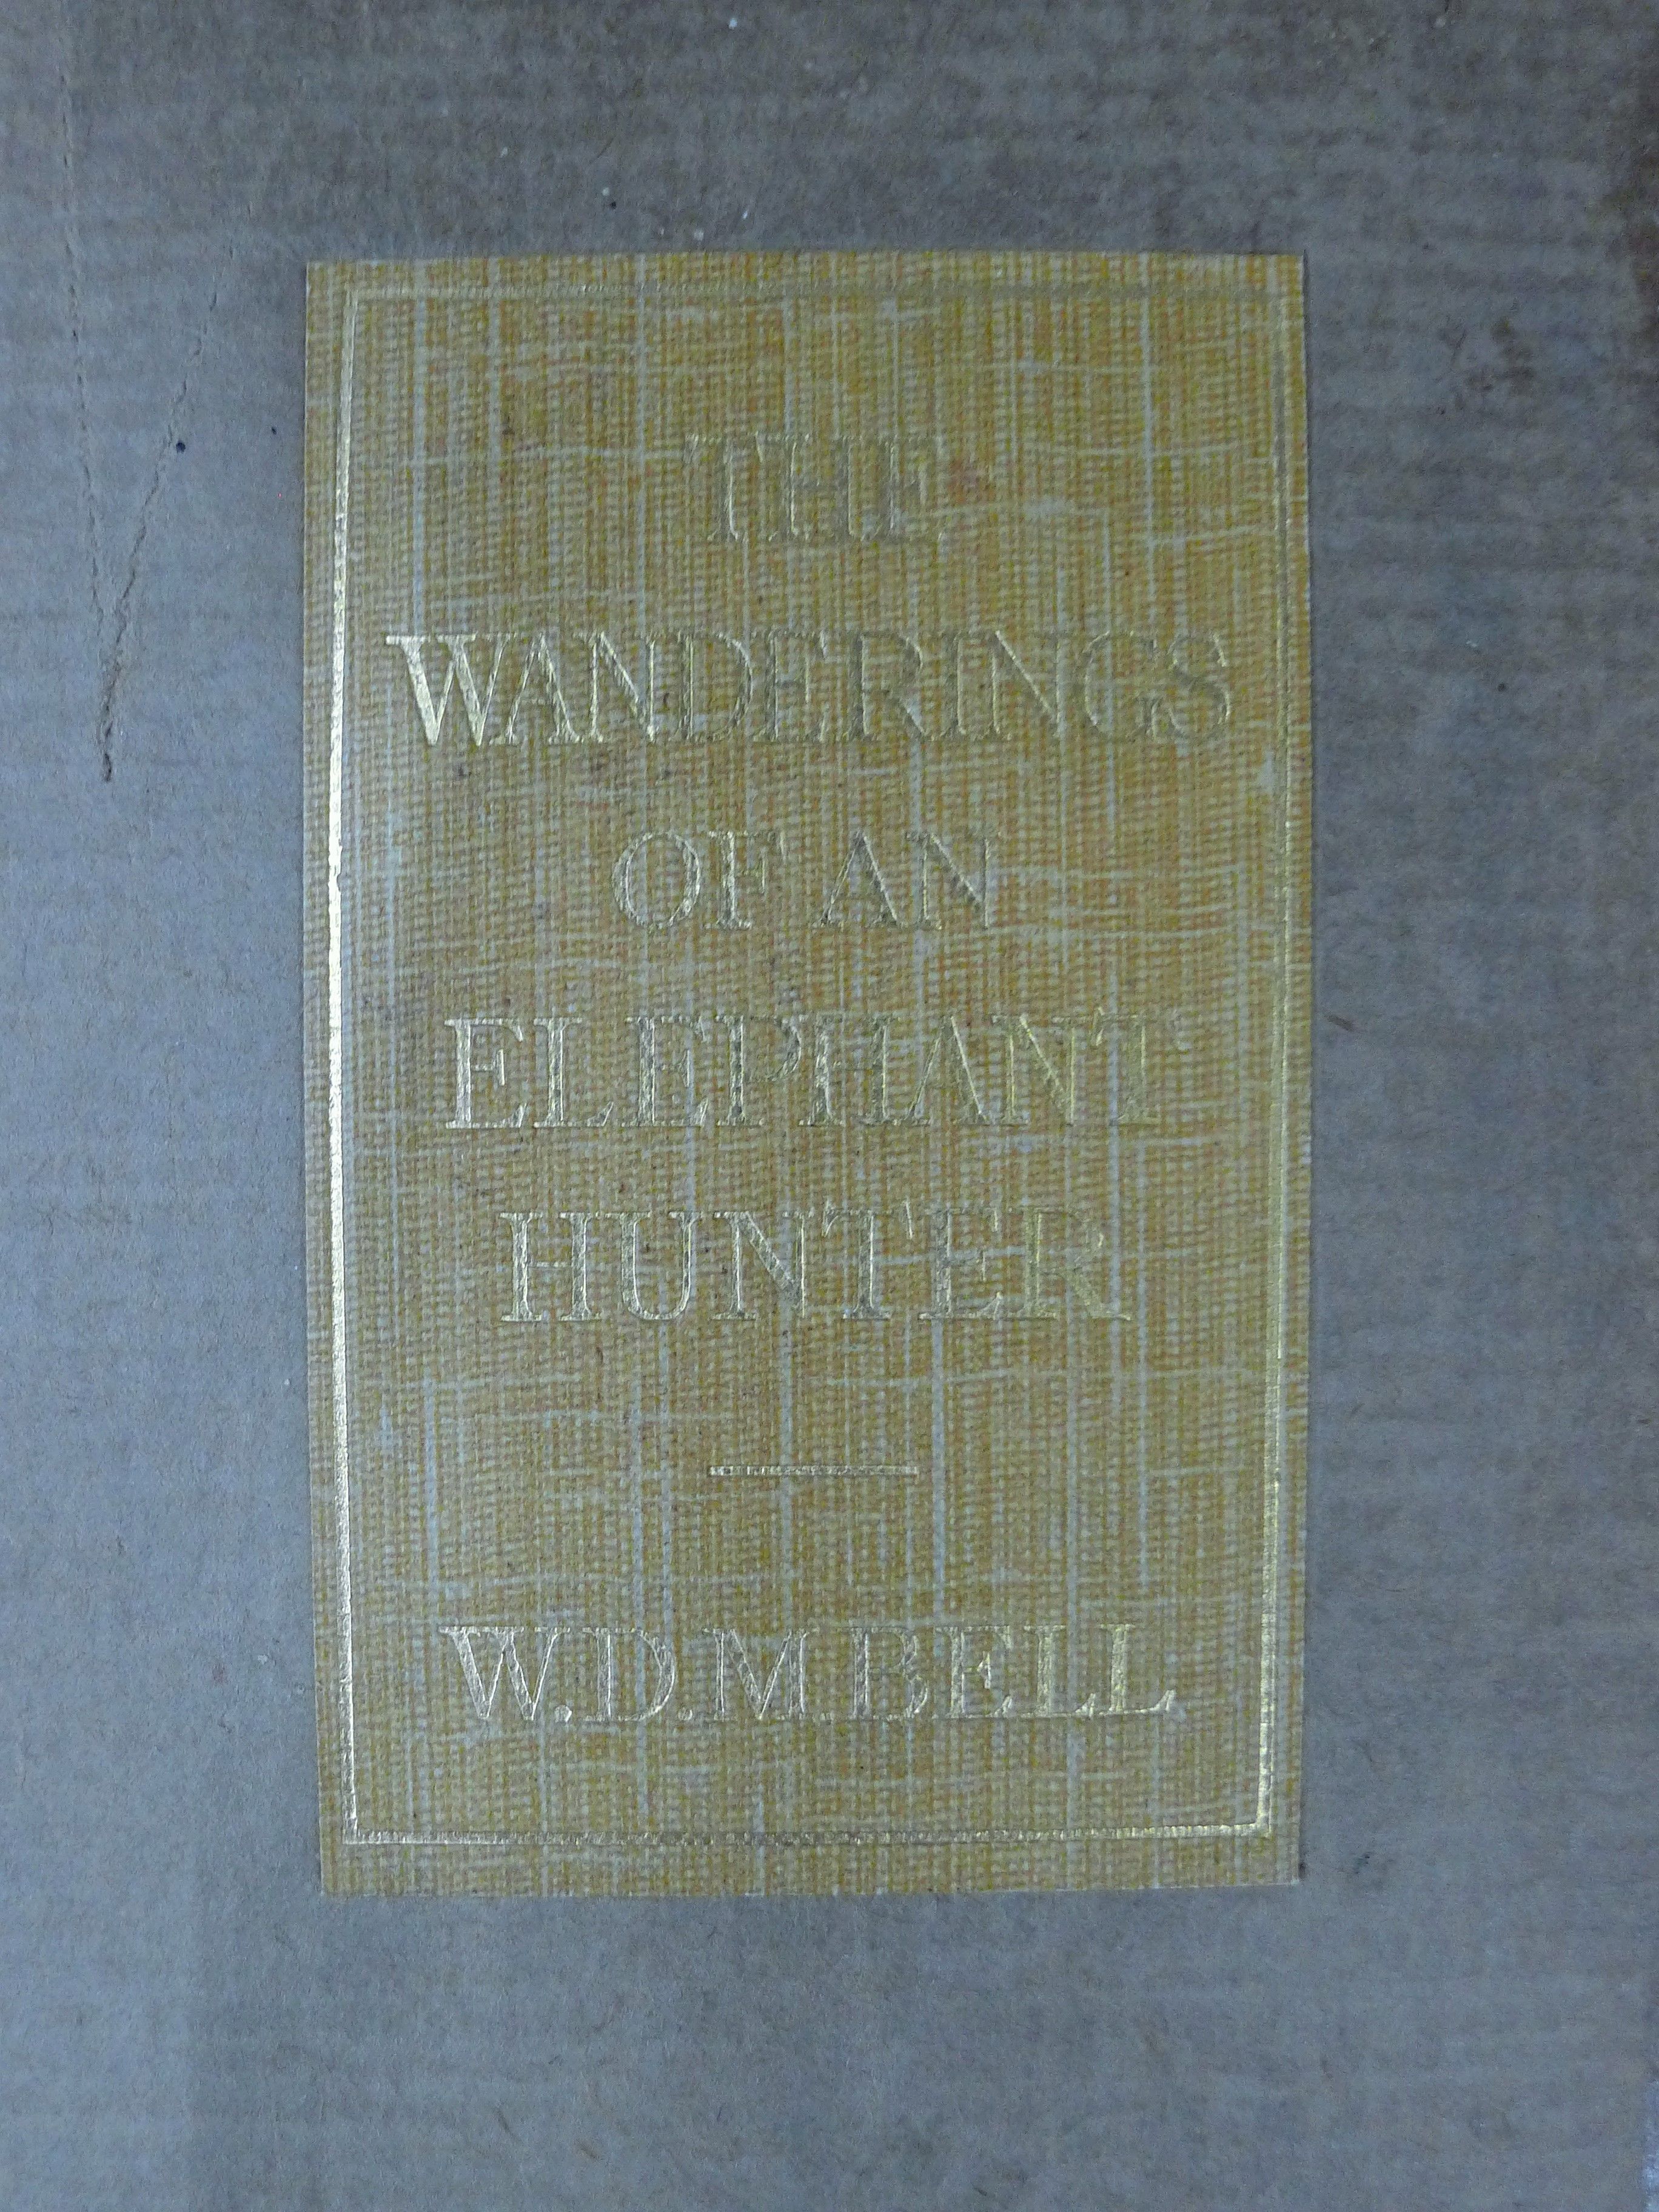 W D M Bell, The Wanderings of an Elephant Hunter, 1933, first edition. - Image 2 of 7